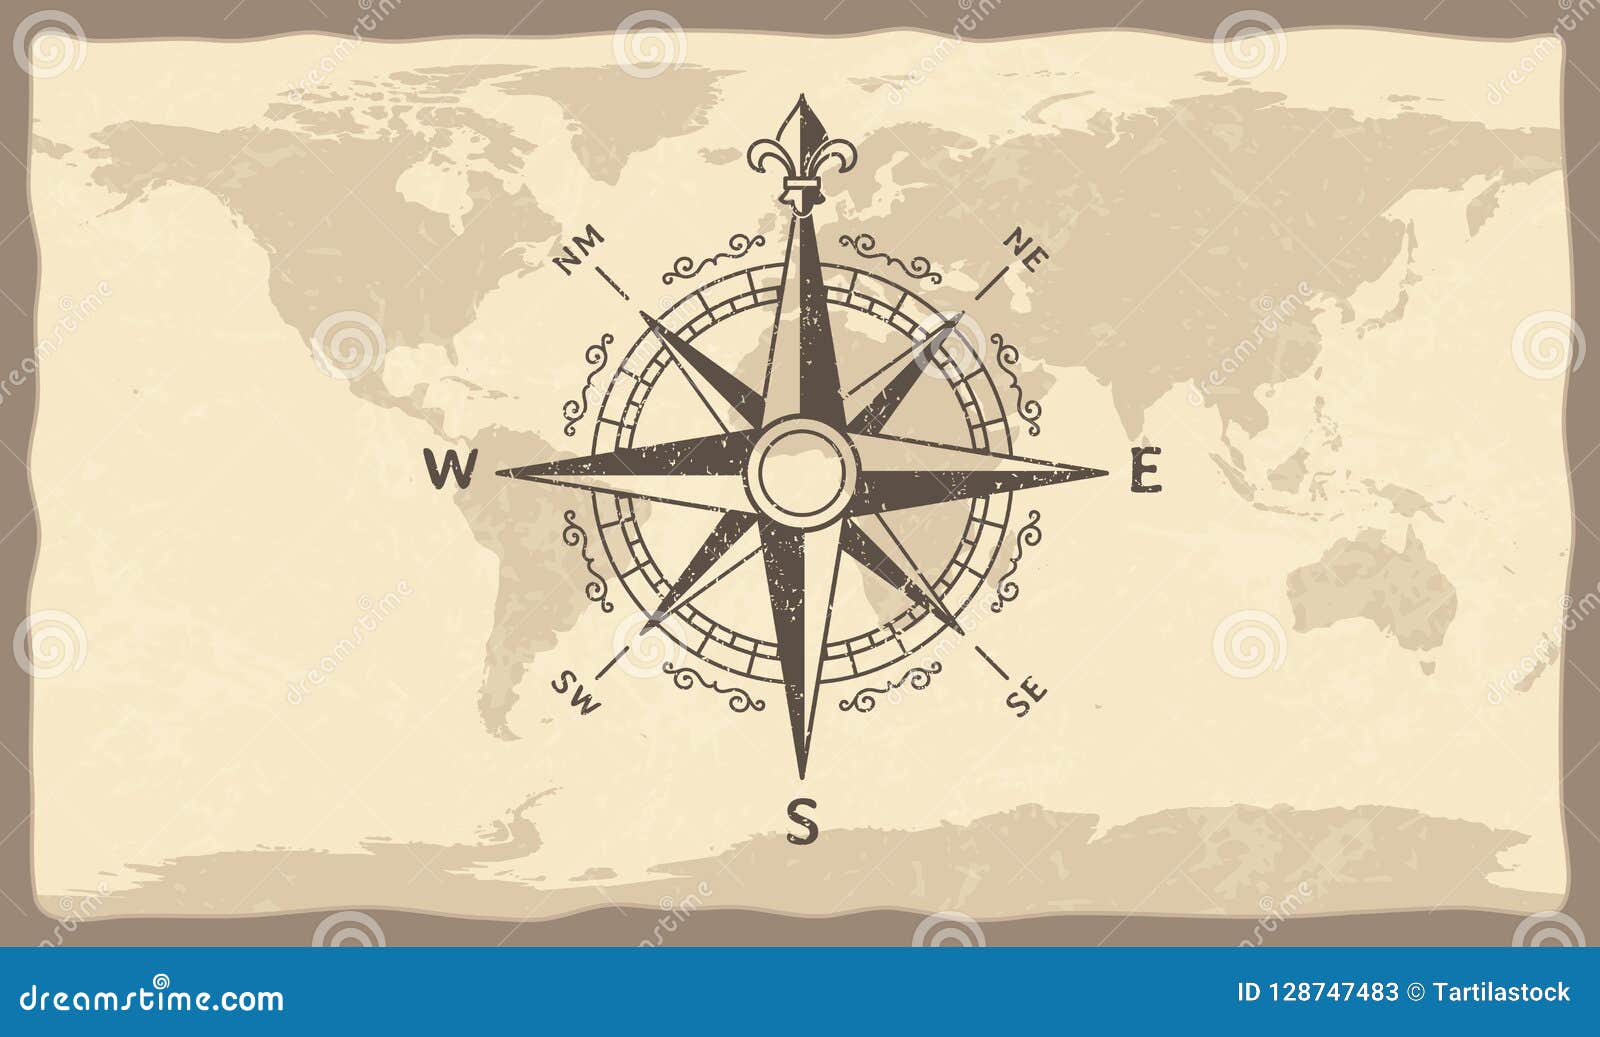 antique compass on world map. vintage geographic history maps with marine compasses arrows  